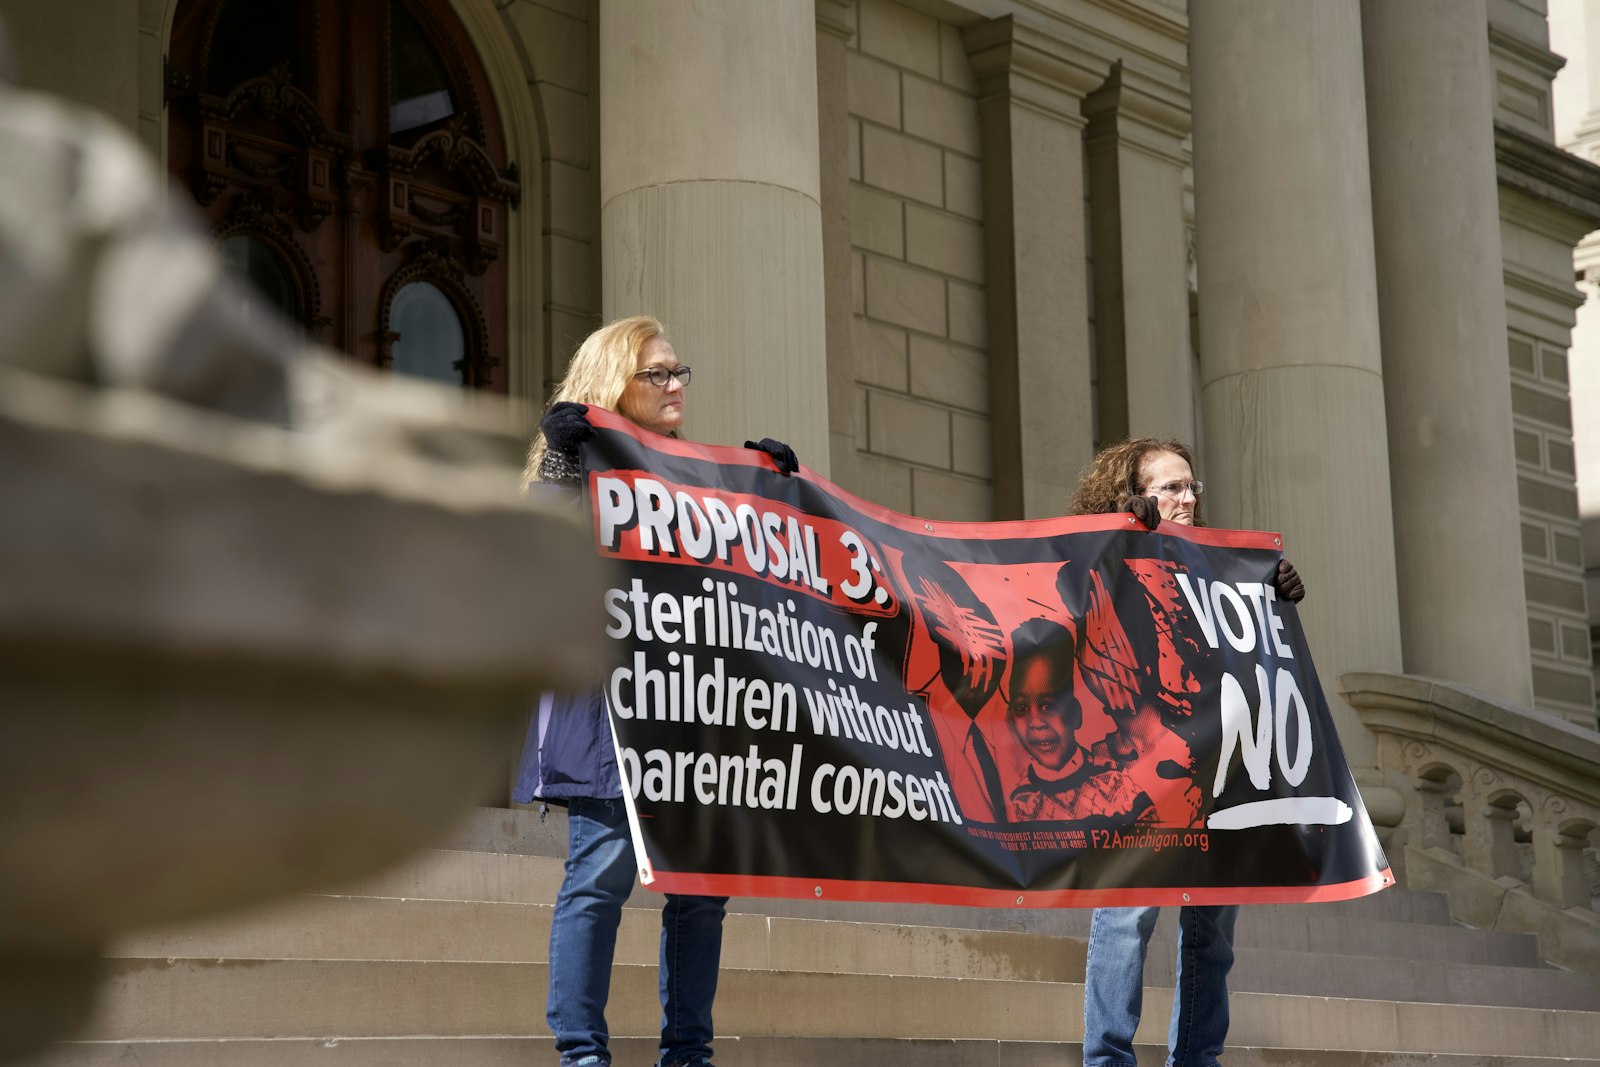 A carve-out in the proposal that allows abortions based on the "mental health" of the mother, at the discretion of the attending health care professional, means an abortionist could make the decision to perform an abortion at any point during pregnancy, Bursch said.